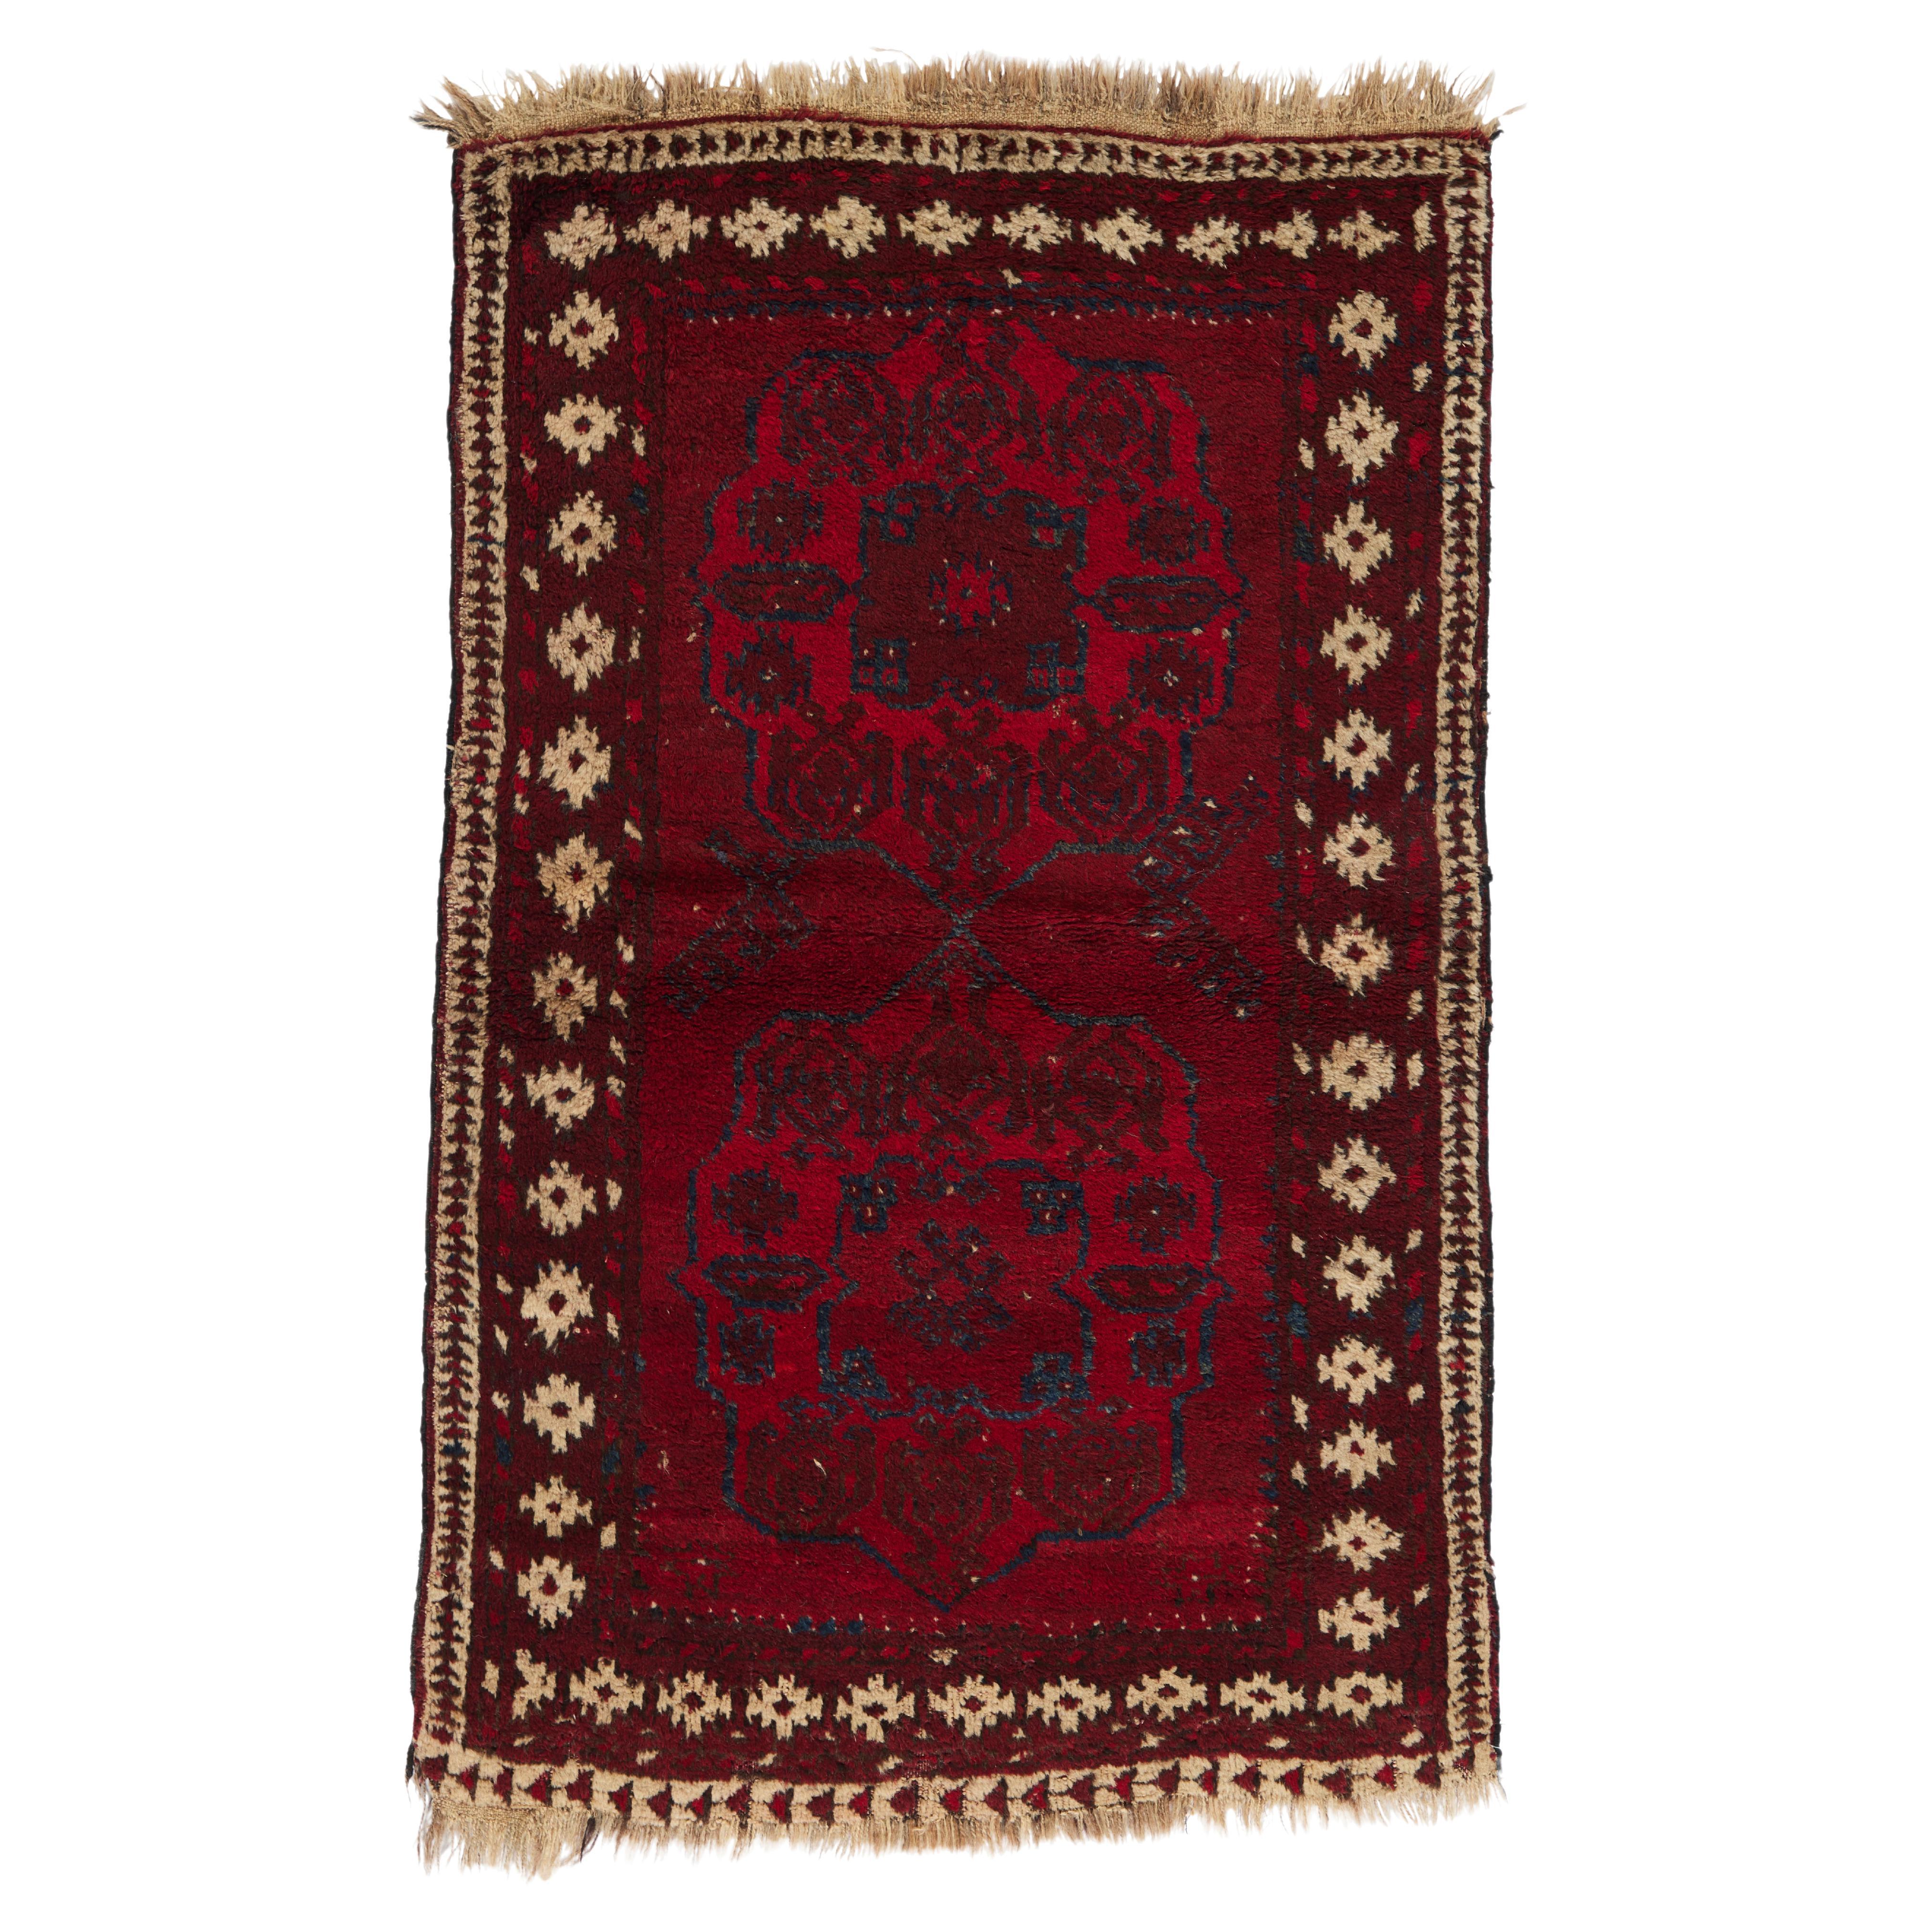 ANTIQUE AFGHANI 3' 0" X 4' 11" Over 100 years old, double boarder wool For Sale